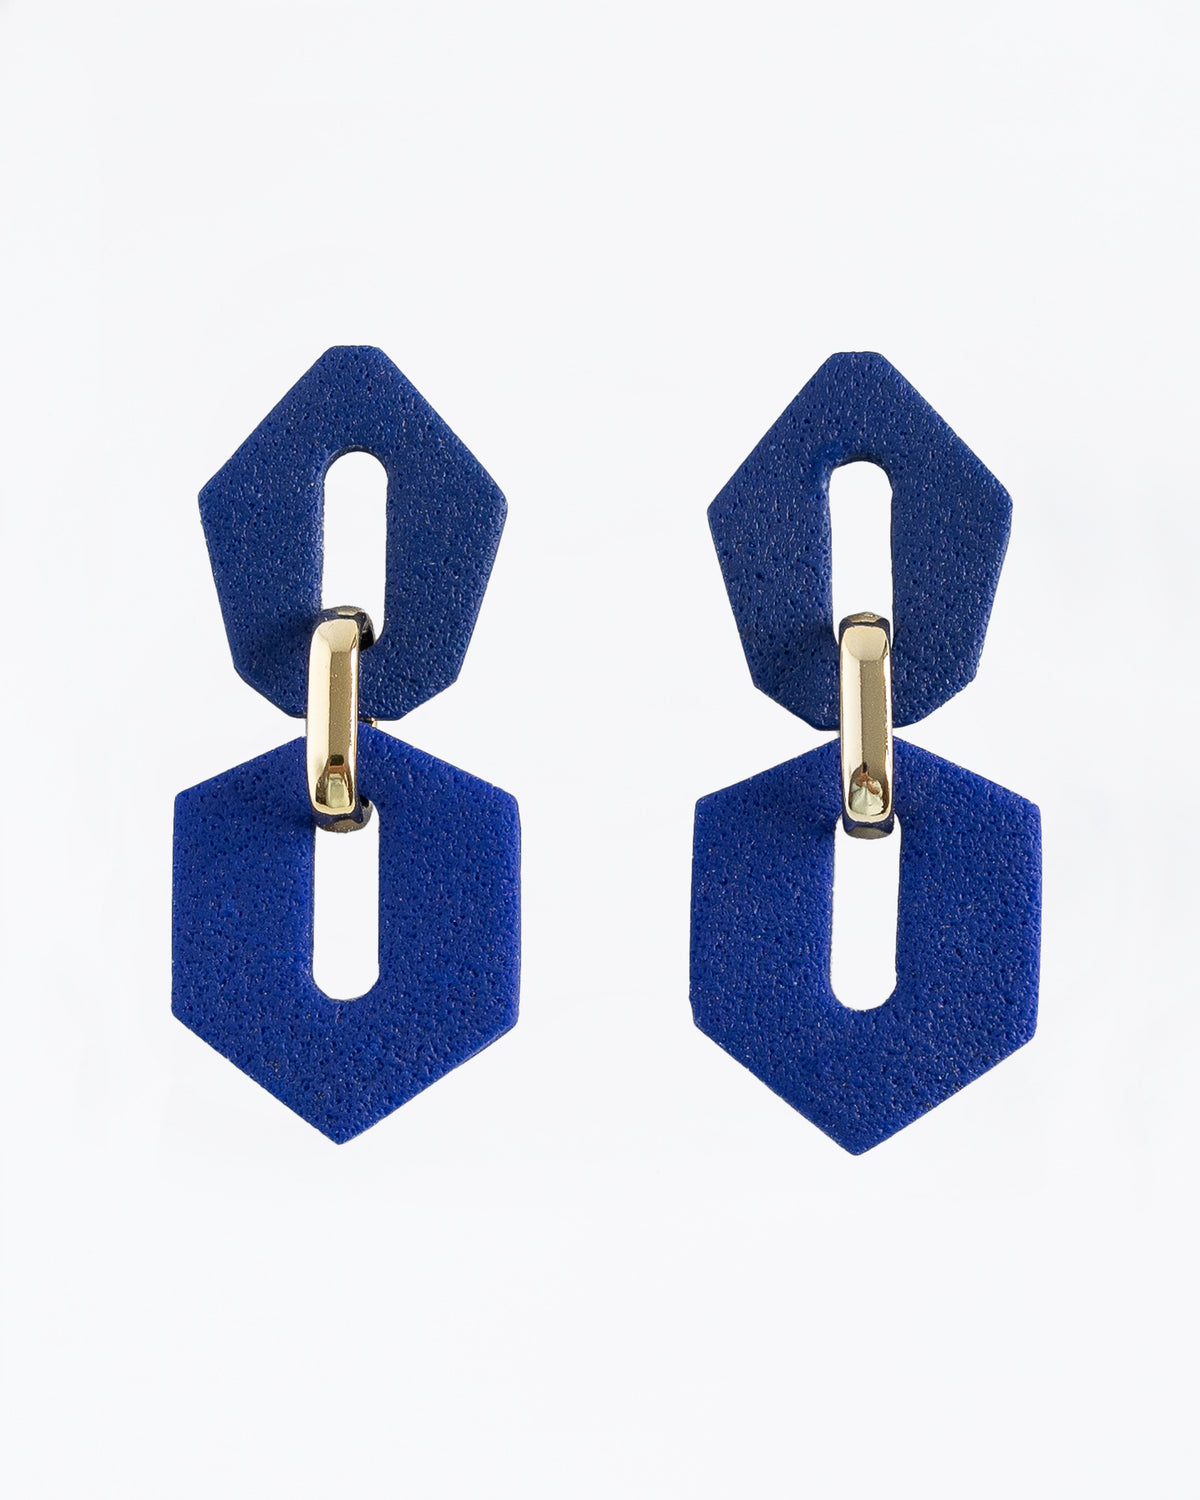 Front view of Shilla earrings in Hue blue color.